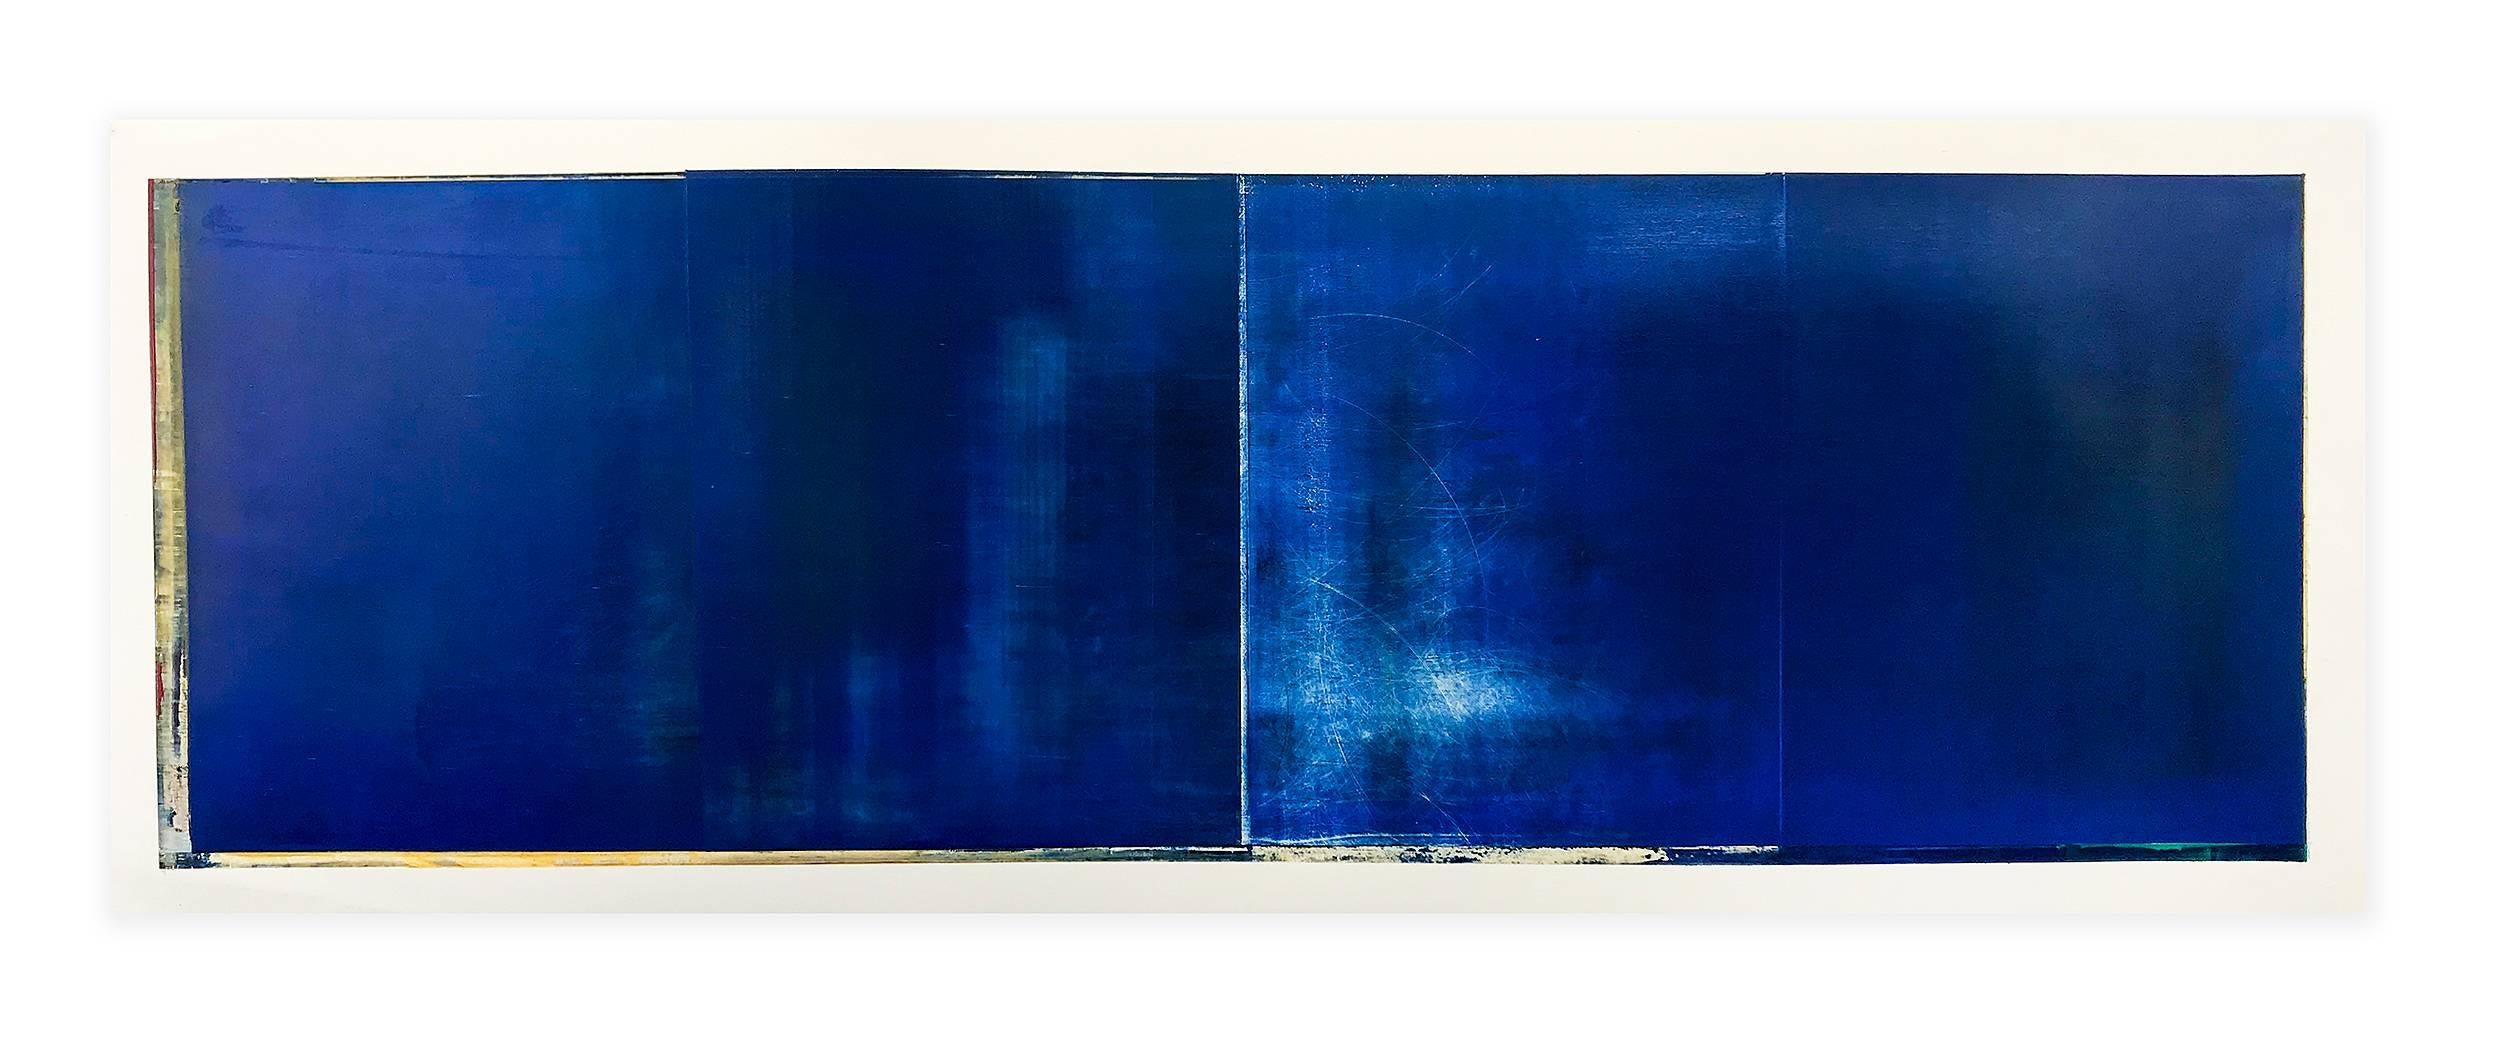 Daniel Brice, Untitled (OX 48), 2017, oil on paper, 18 x 51 inches, abstract, color field painting on Arches archival paper specifically made for oil paint. This piece is predominantly royal blue. 

Saturated color is Brice’s tool to relate the